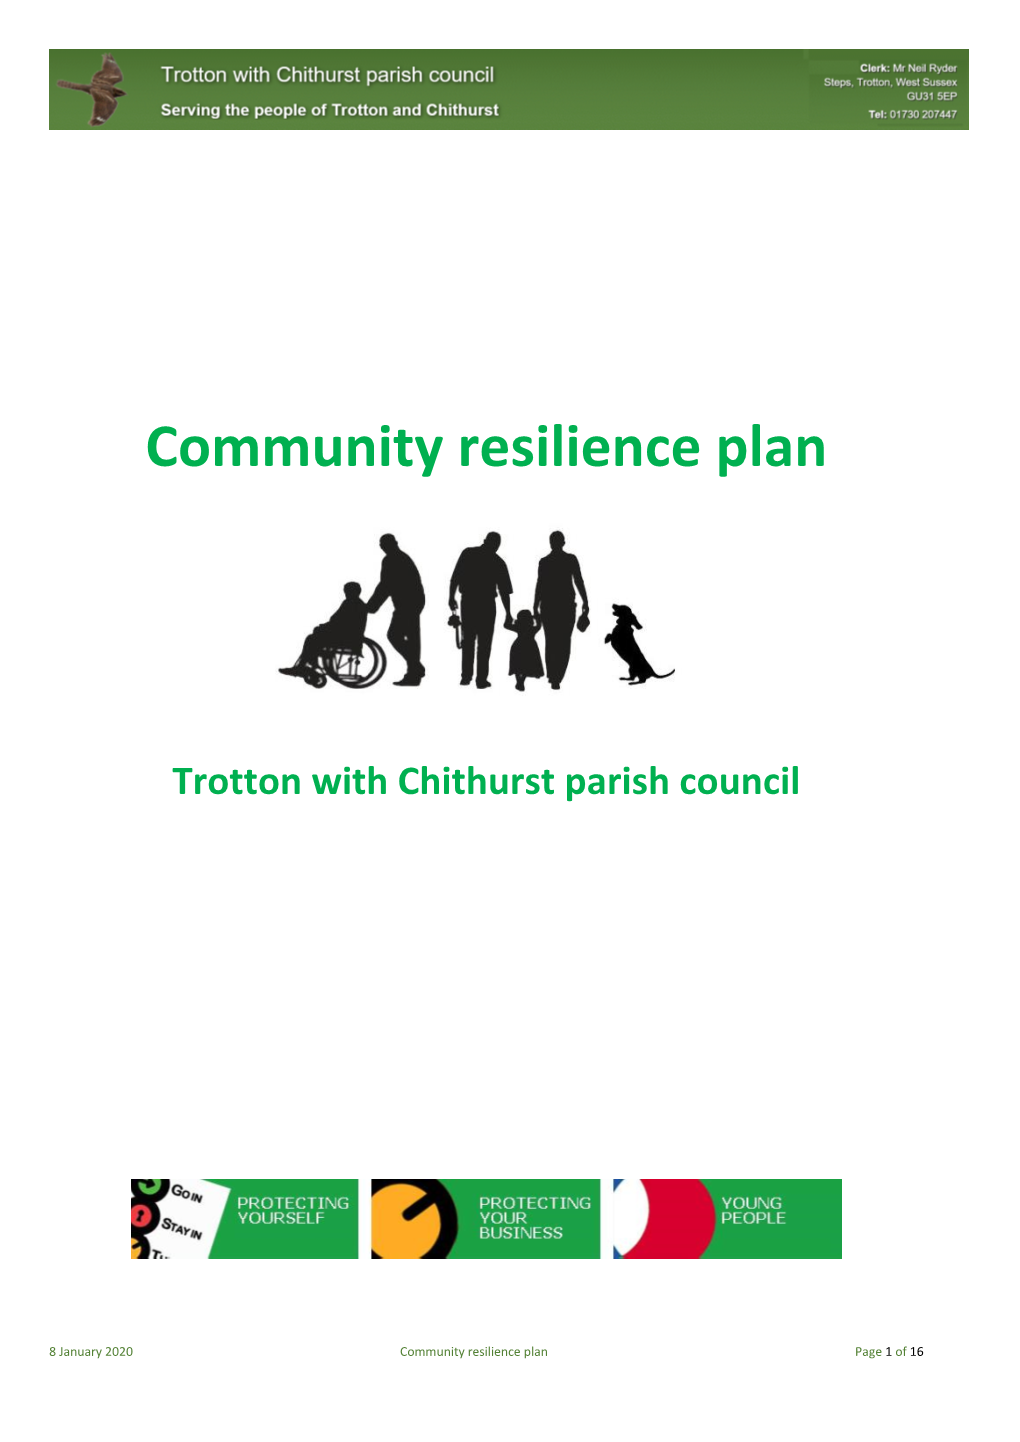 Community Resilience Plan